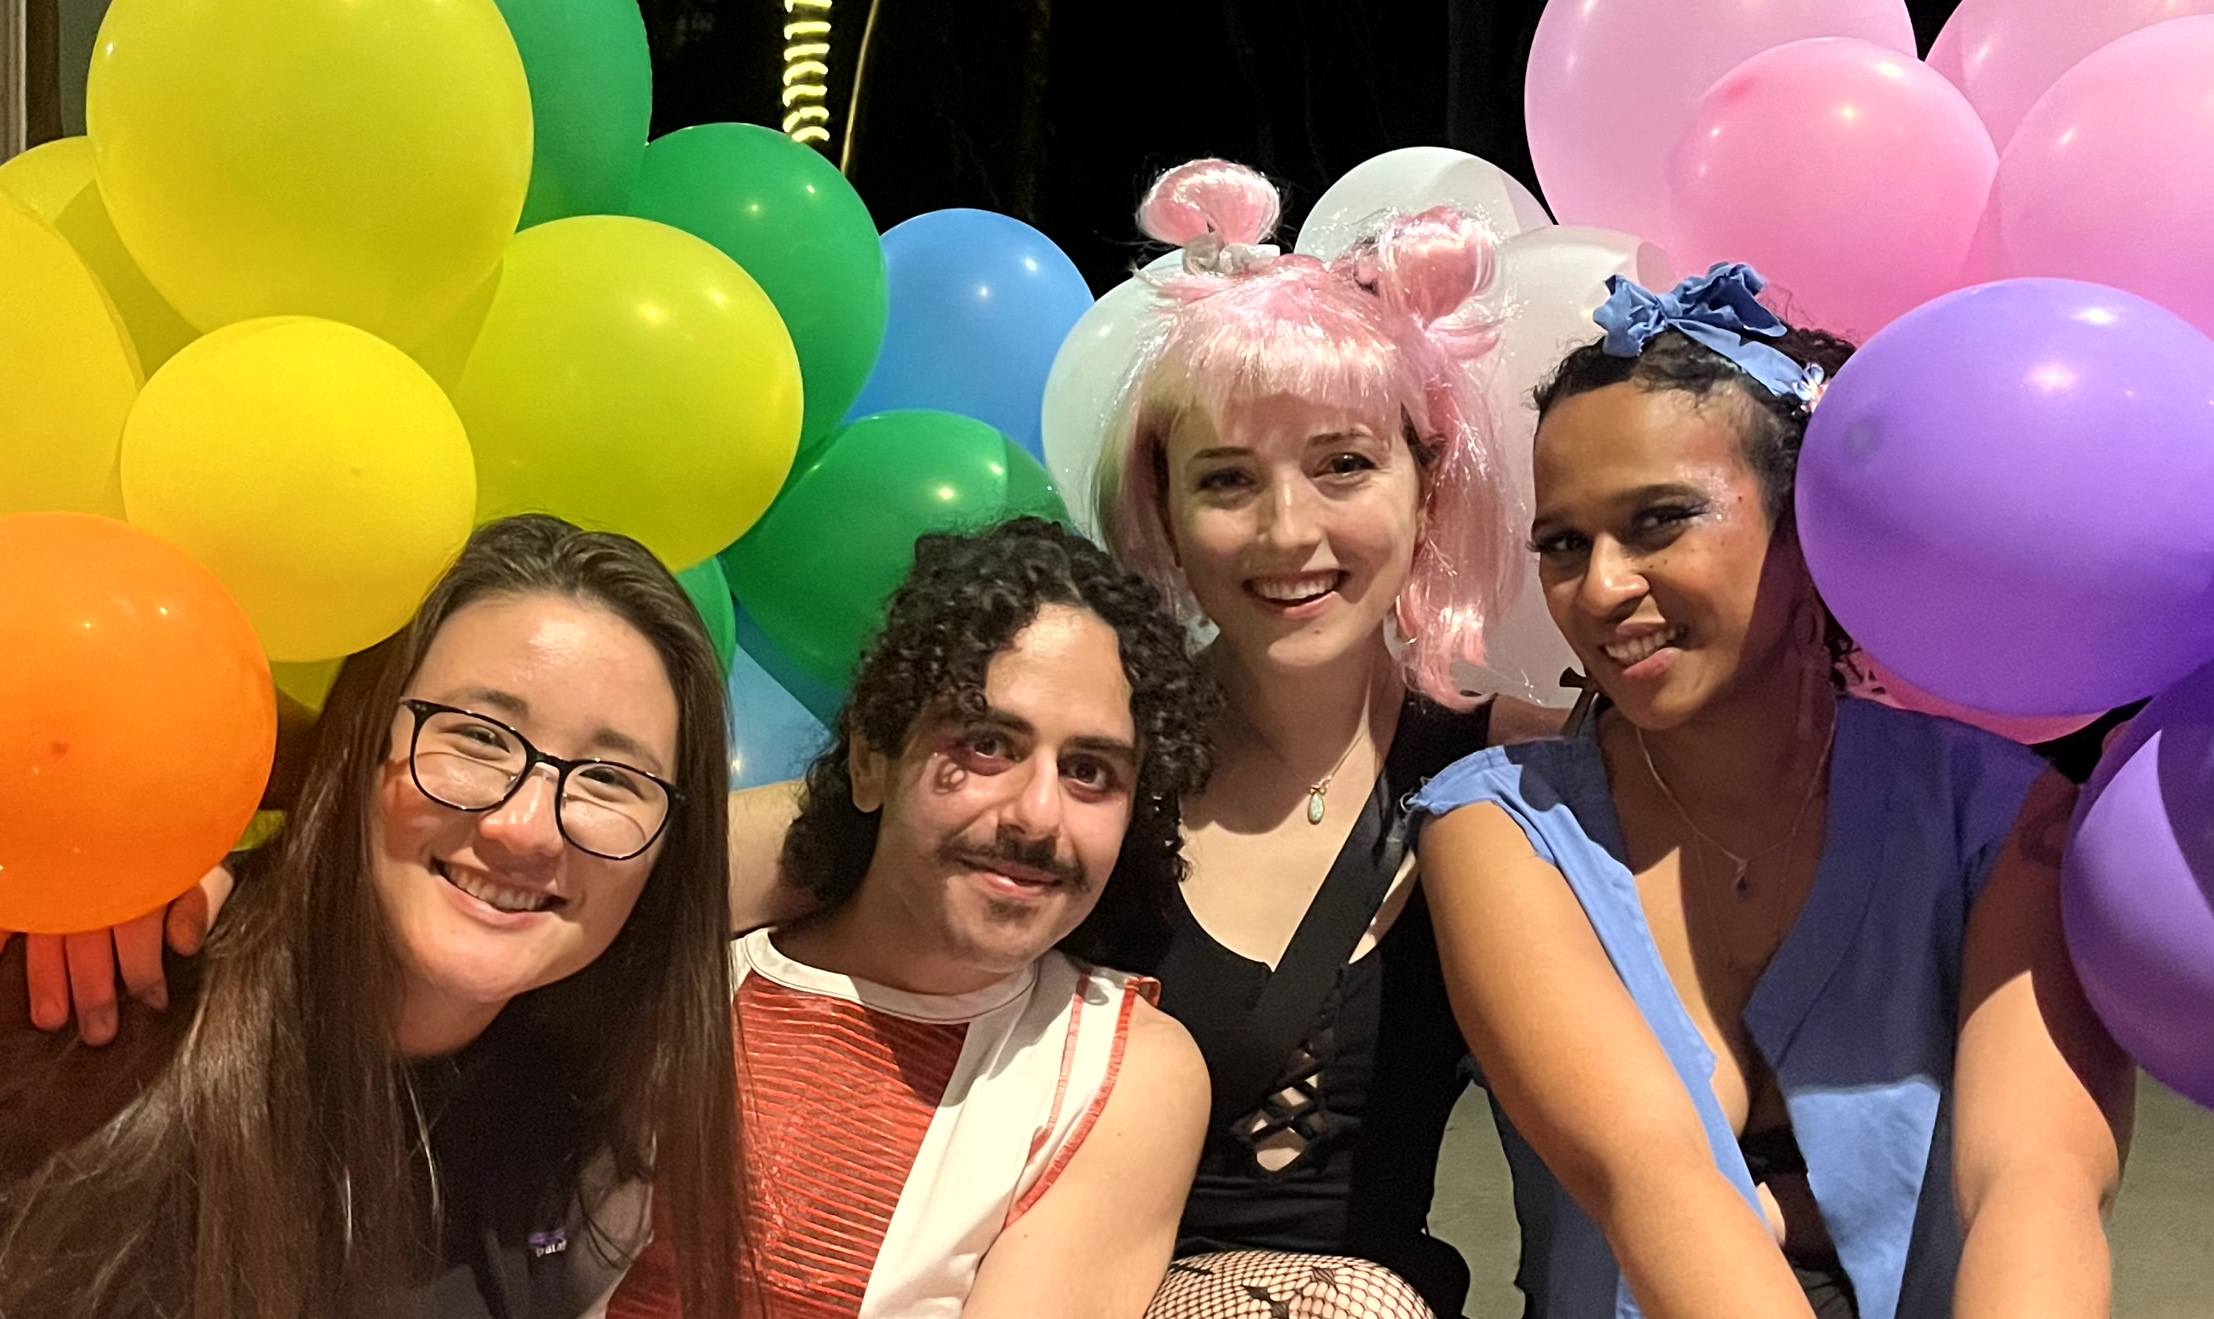 Group photos of smiling students with rainbow colored balloons in background